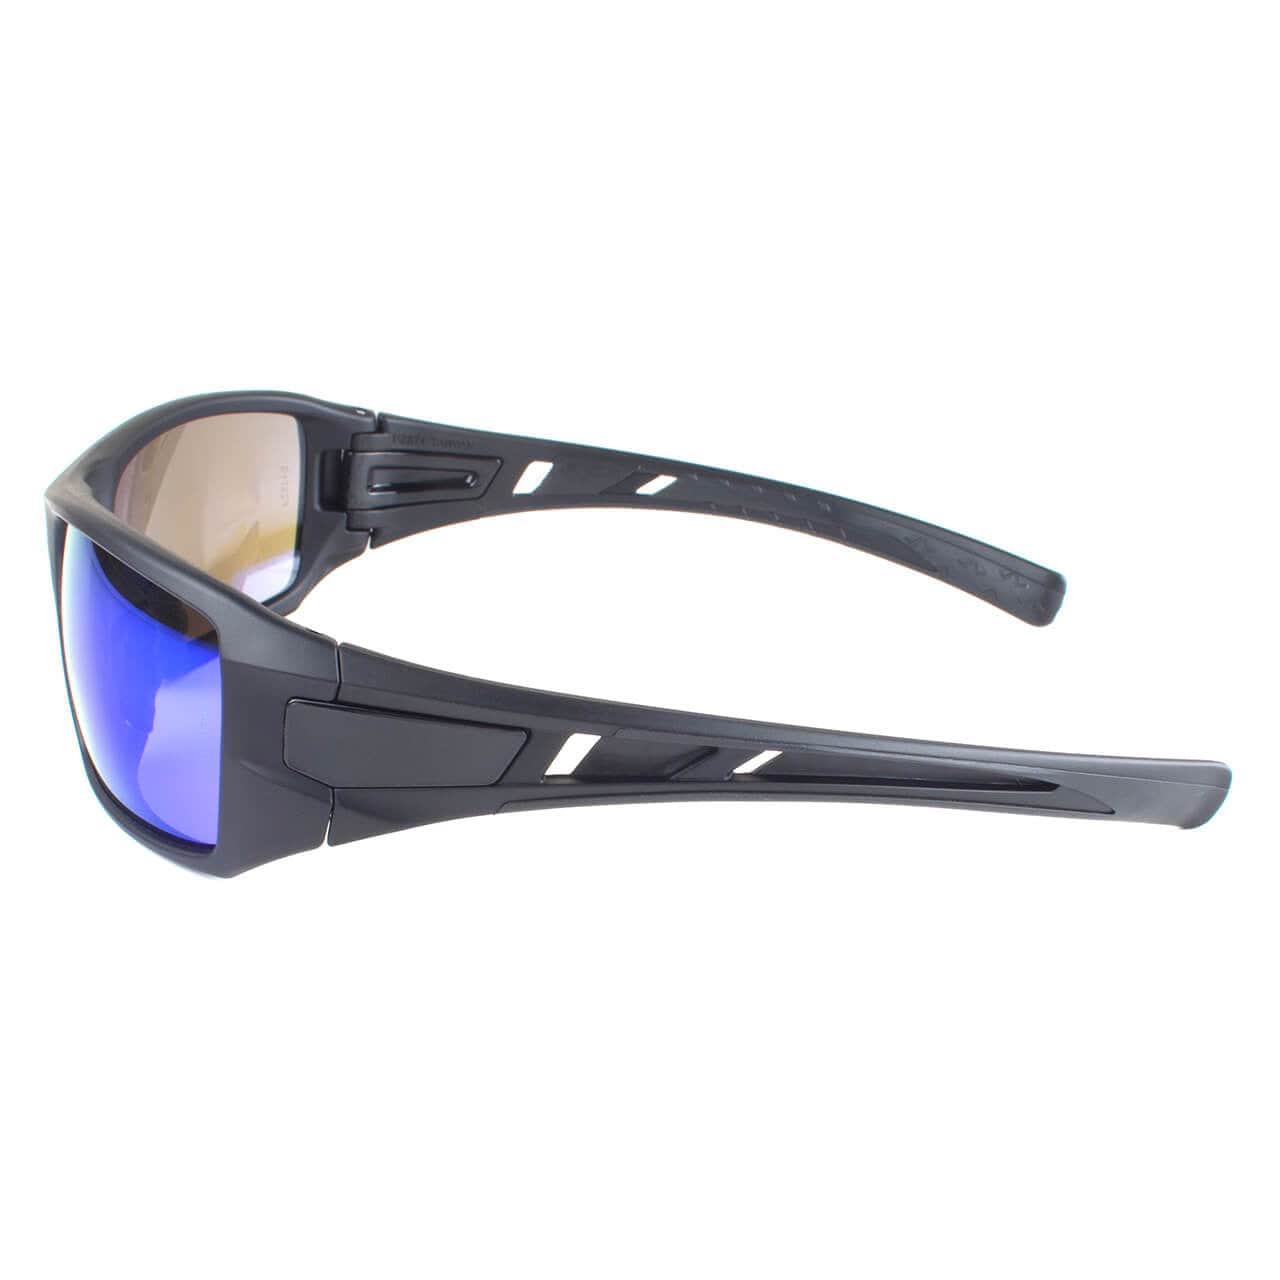 Metel M30 Safety Glasses with Black Frame and Blue Mirror Lenses Side View